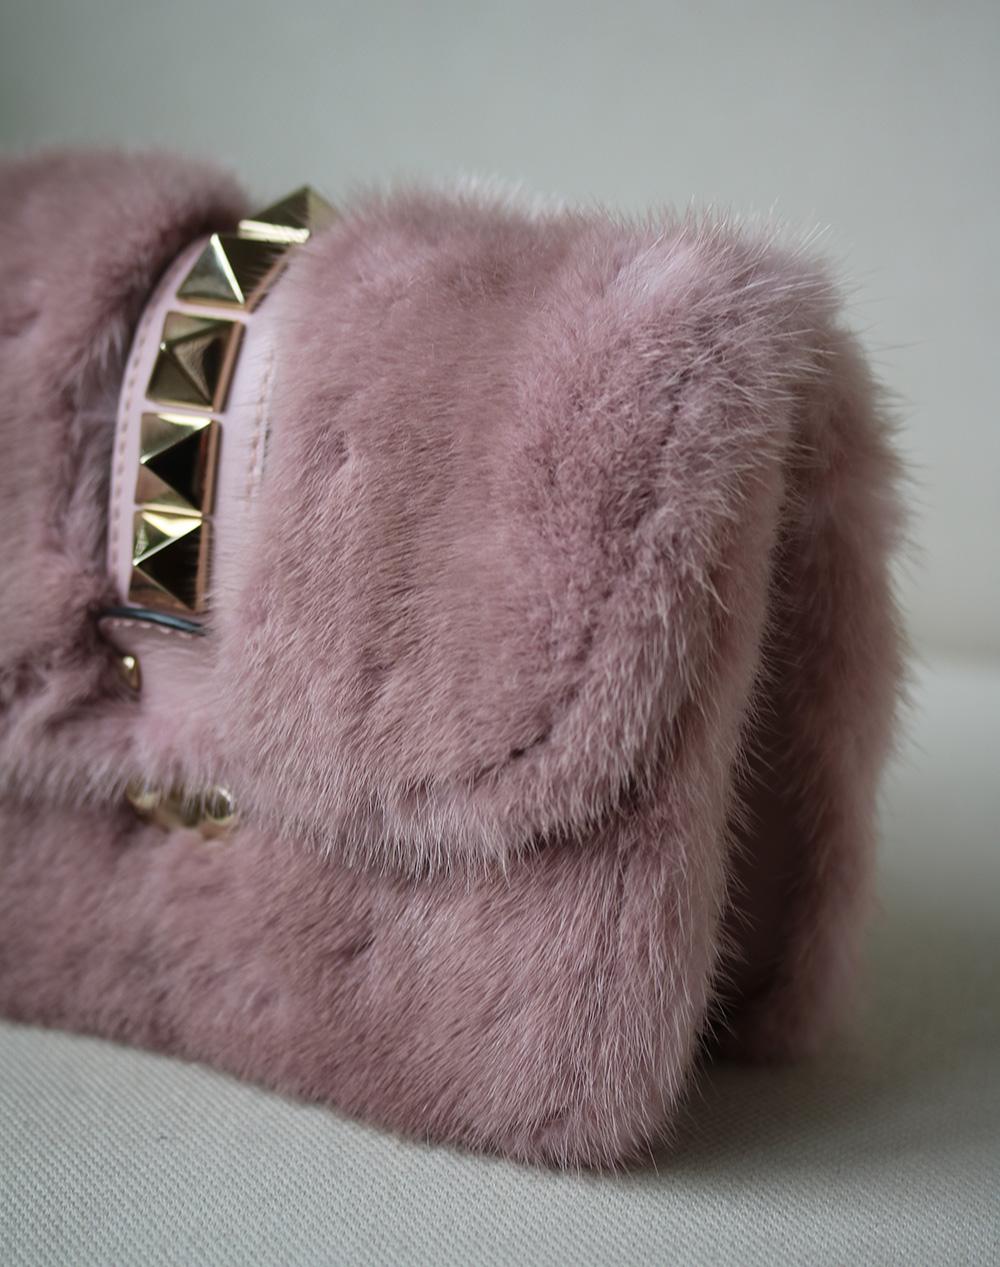 Valentino Garavani's Lock Small shoulder bag, a fan favourite, is back in a lush and dense mink fur design. The chartreuse hue is complemented by dusty pink leather trims and the iconic golden Rockstuds. Material: mink fur. Trim: leather,